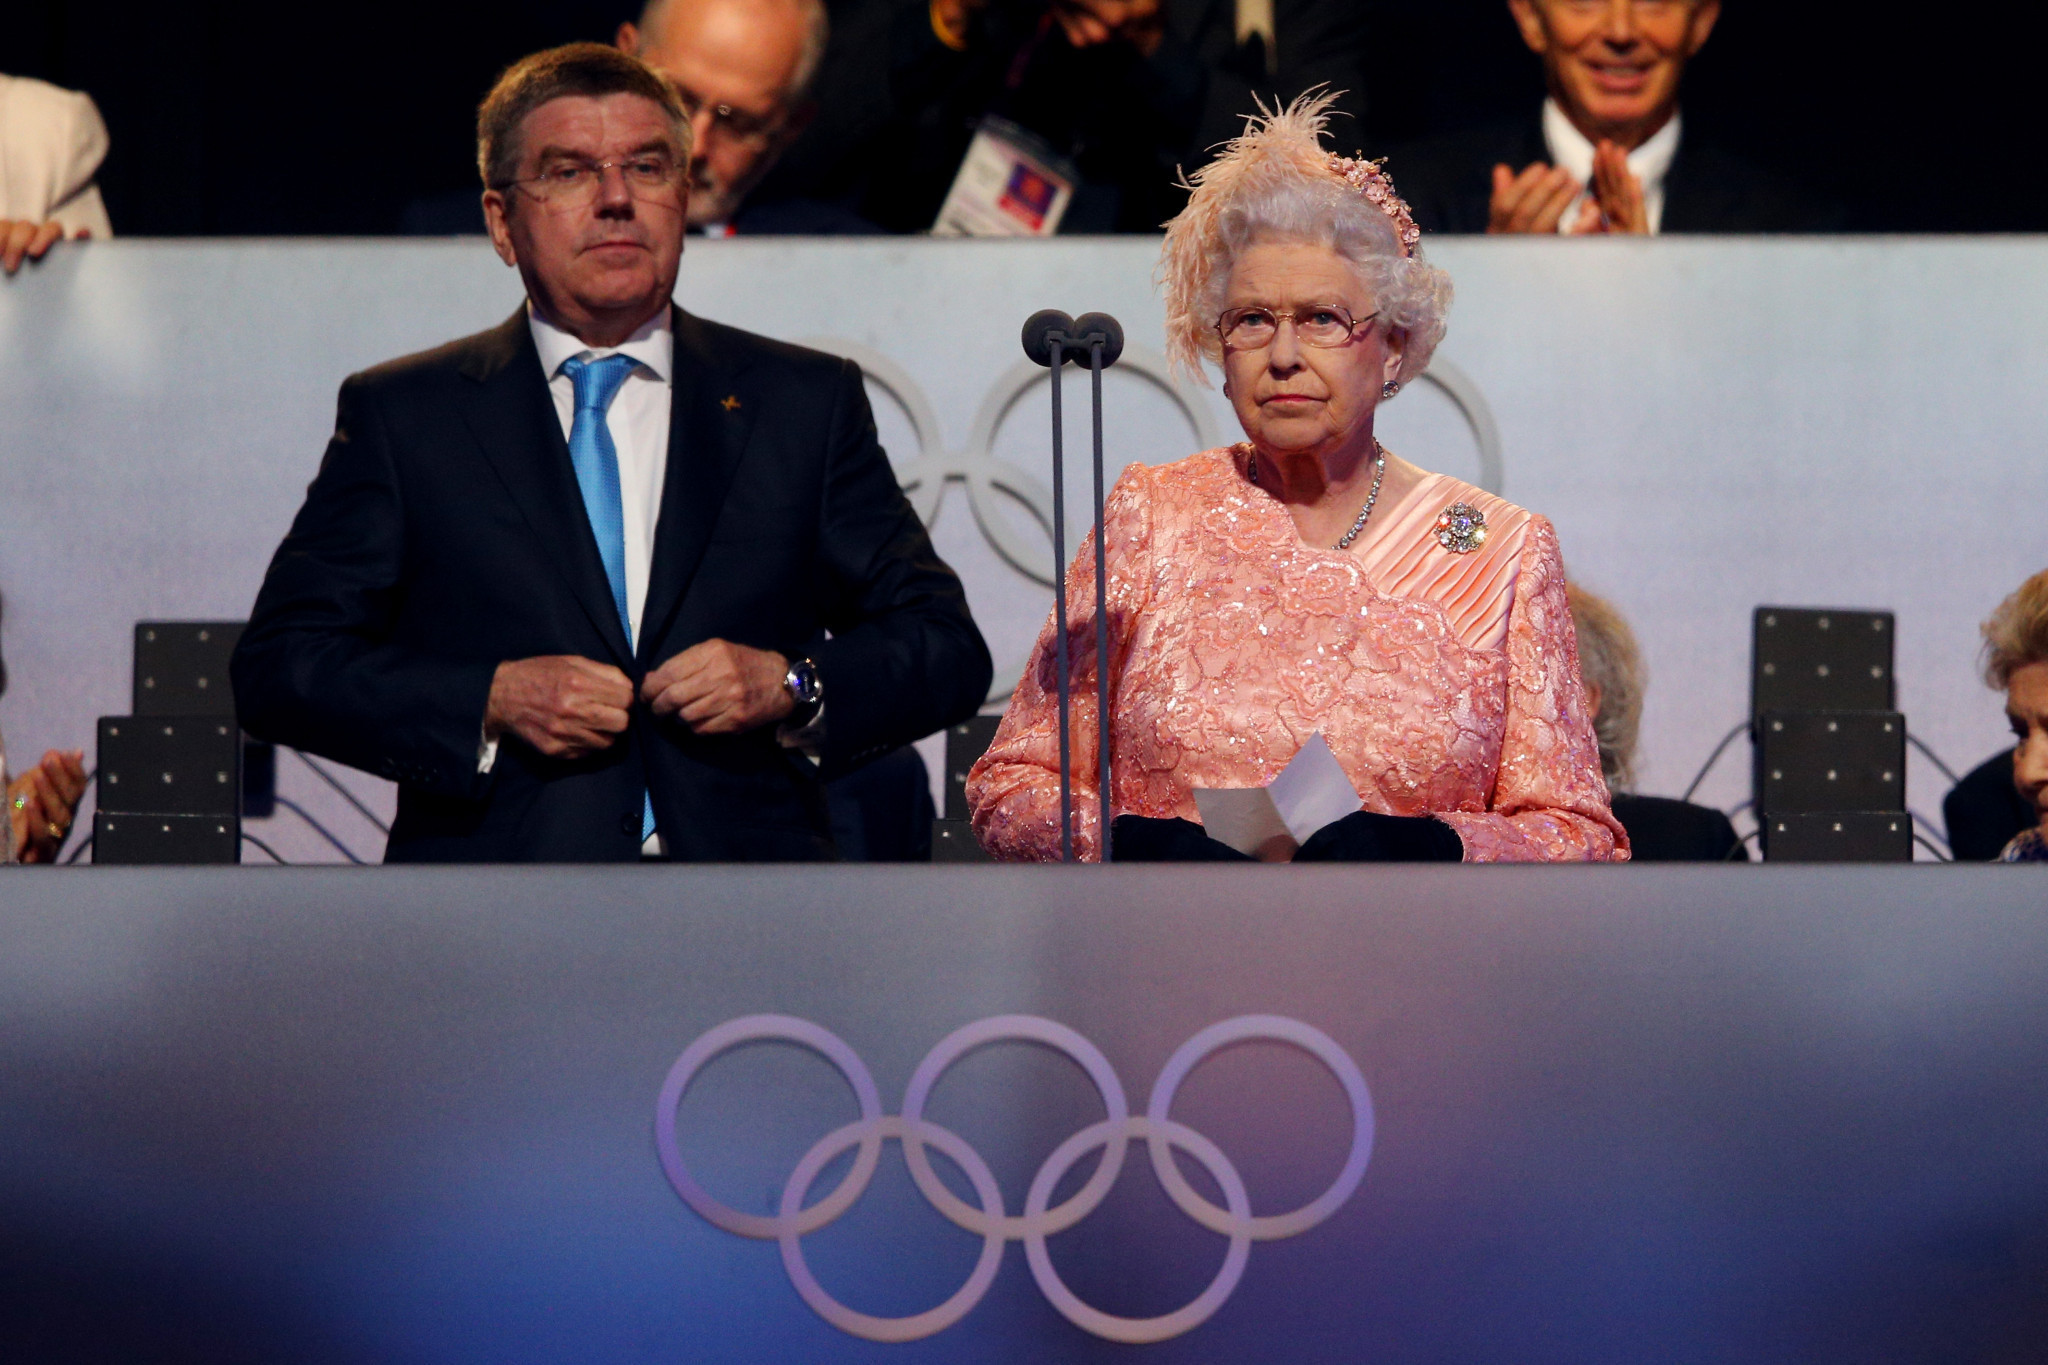 IOC President Thomas Bach, left, said Queen Elizabeth II, right, was "a great supporter of sport and of the Olympic Movement" ©Getty Images